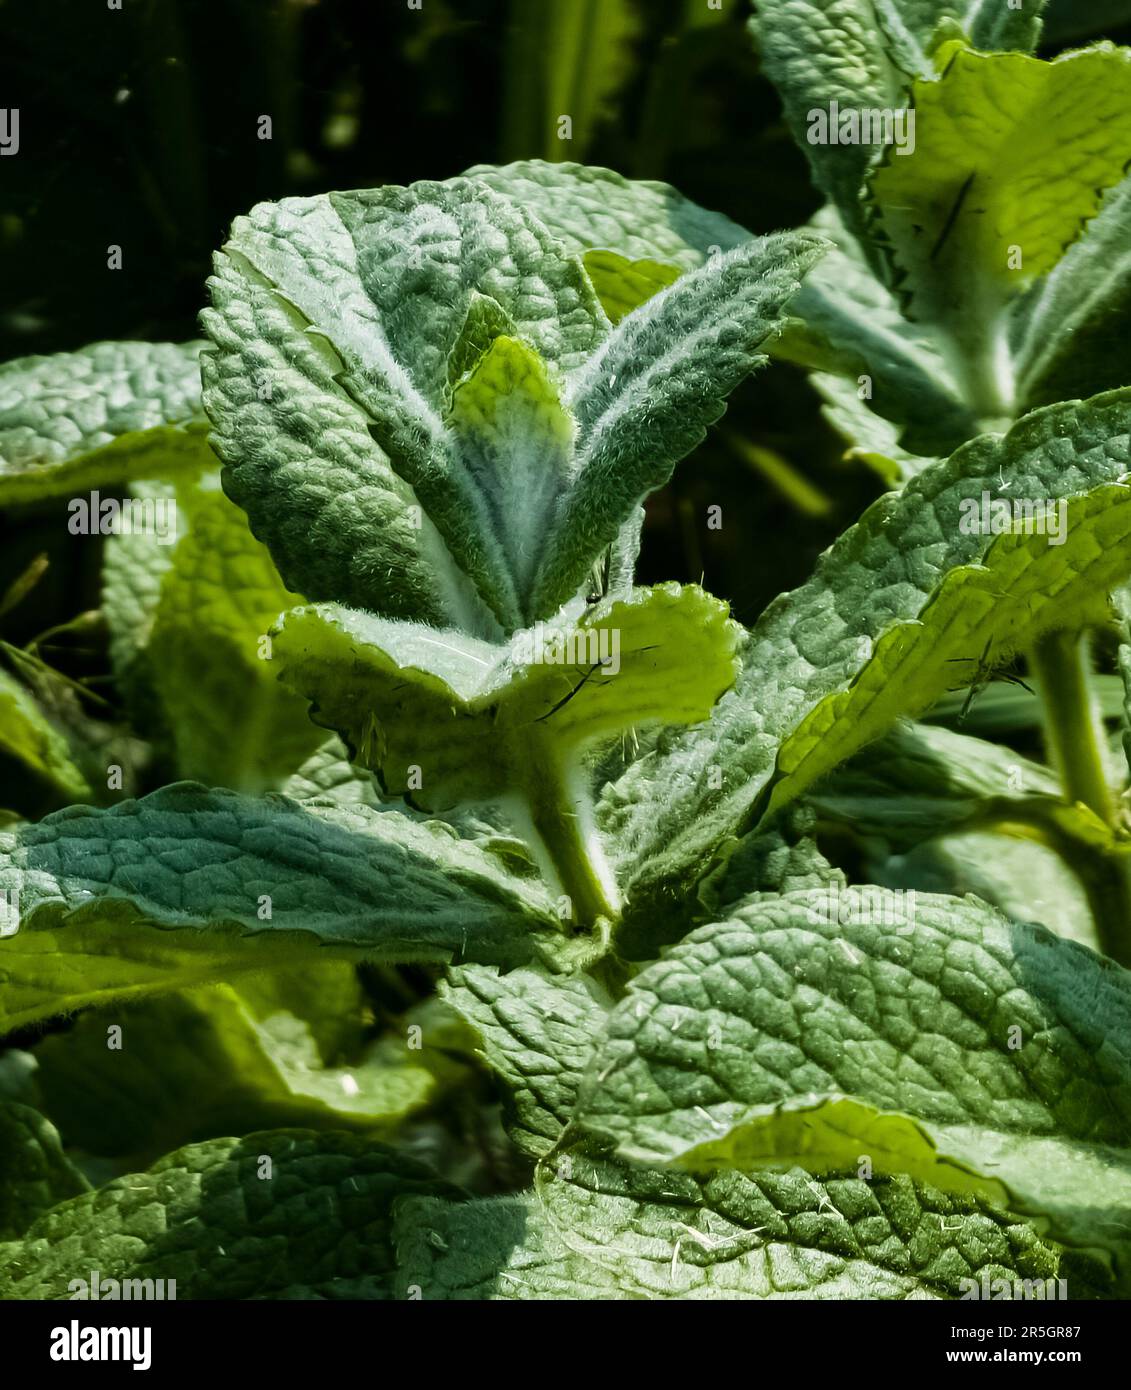 Mint close-up in the garden. Apple mint, or Mentha suaveolens, or downy mint are herbal plants that are rich in health benefits. Stock Photo